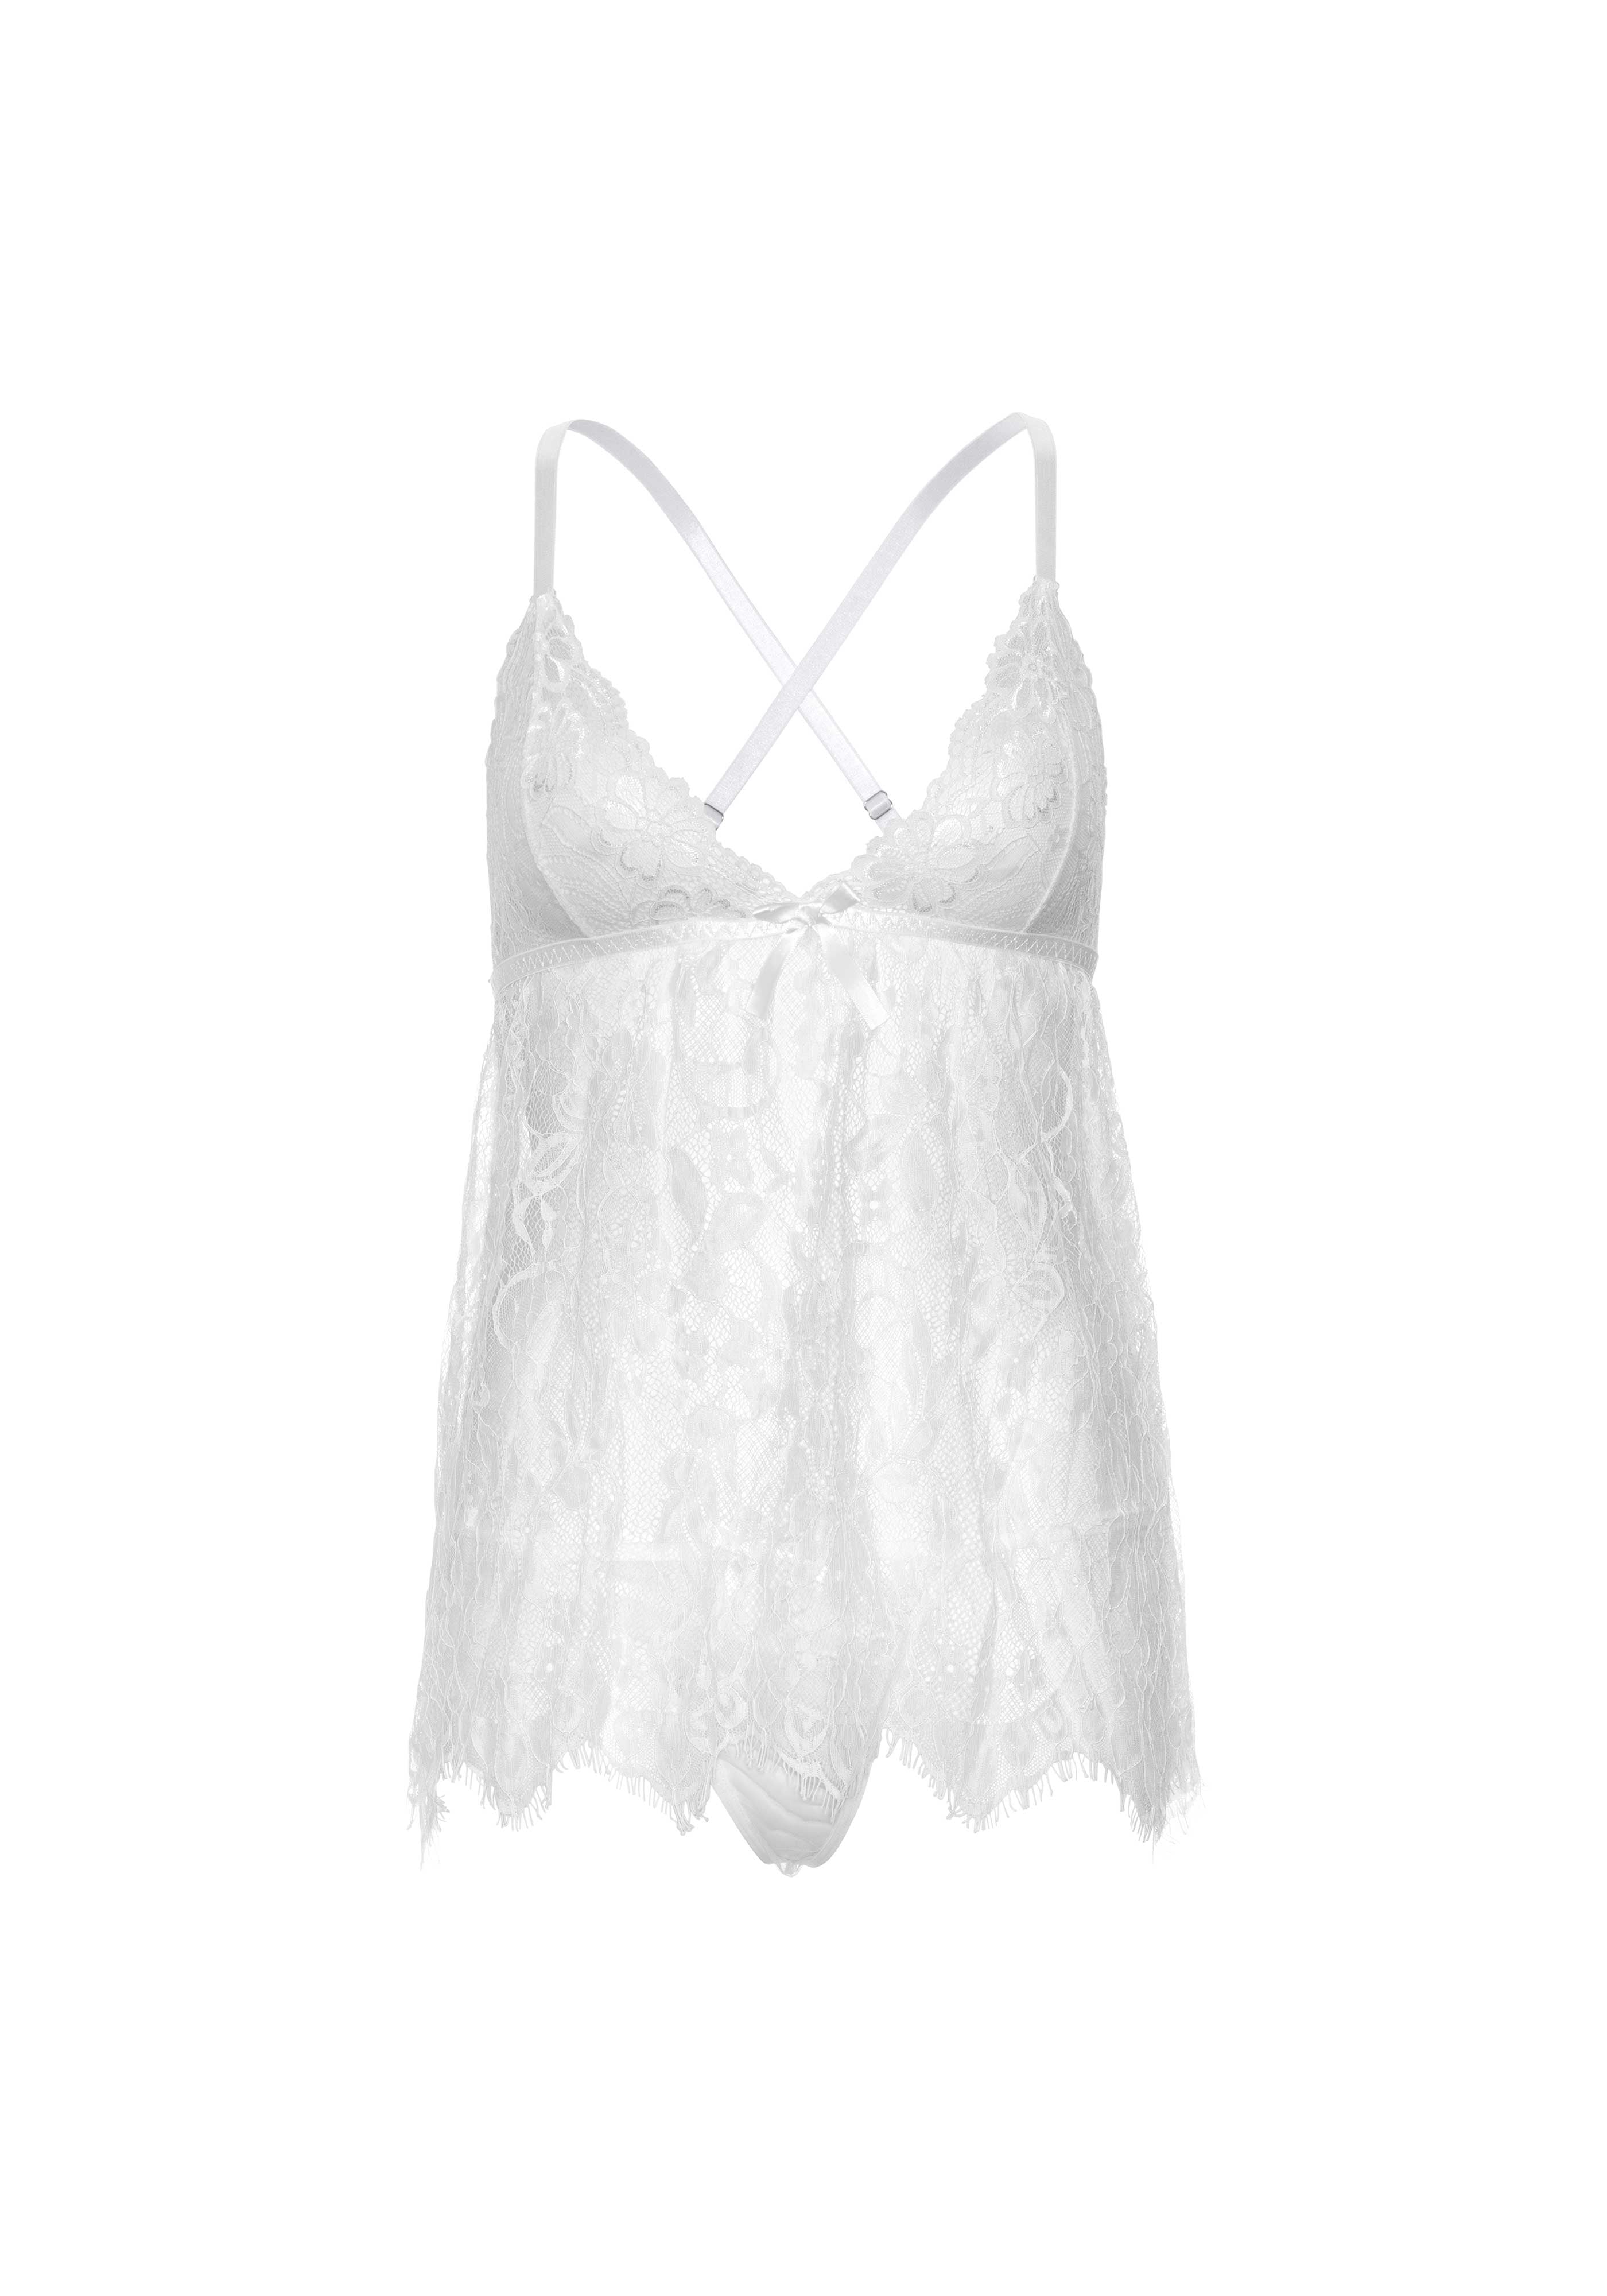 Floral lace babydoll & string